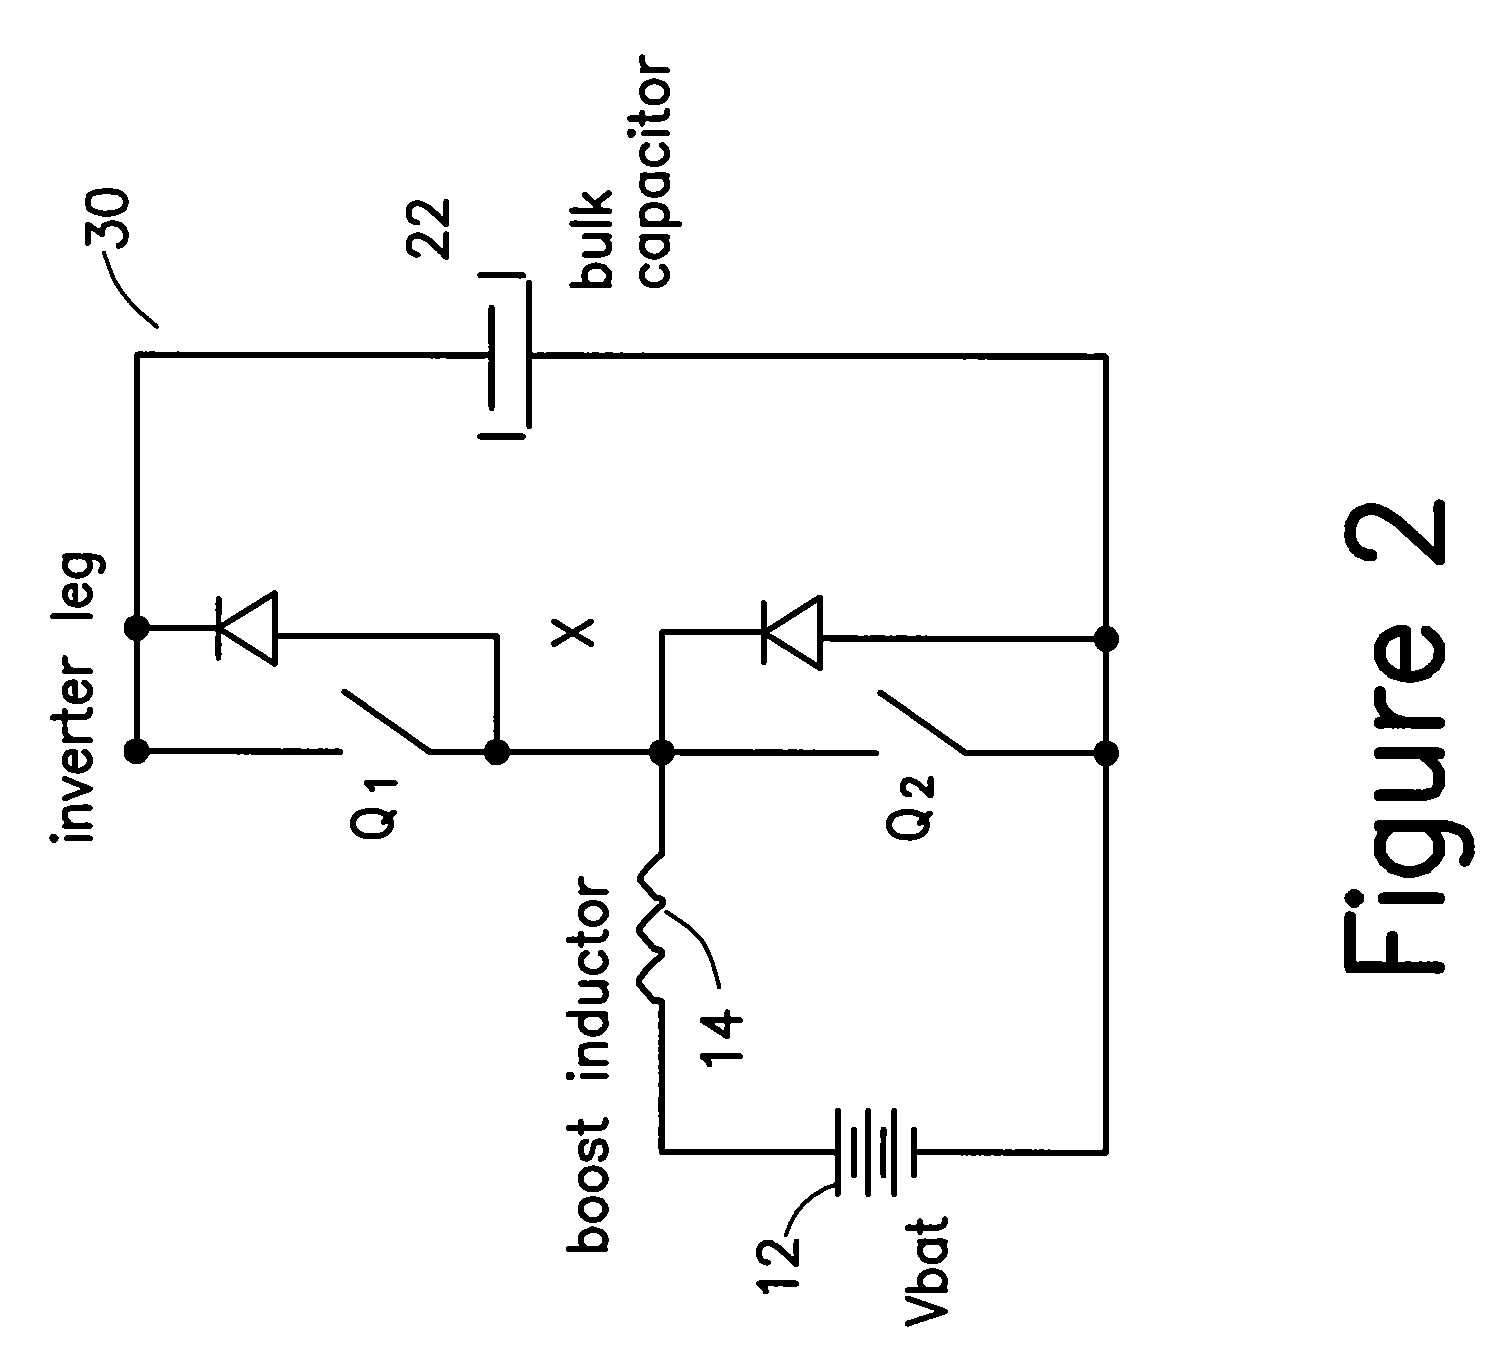 Single stage integrated boost inverter motor drive circuit